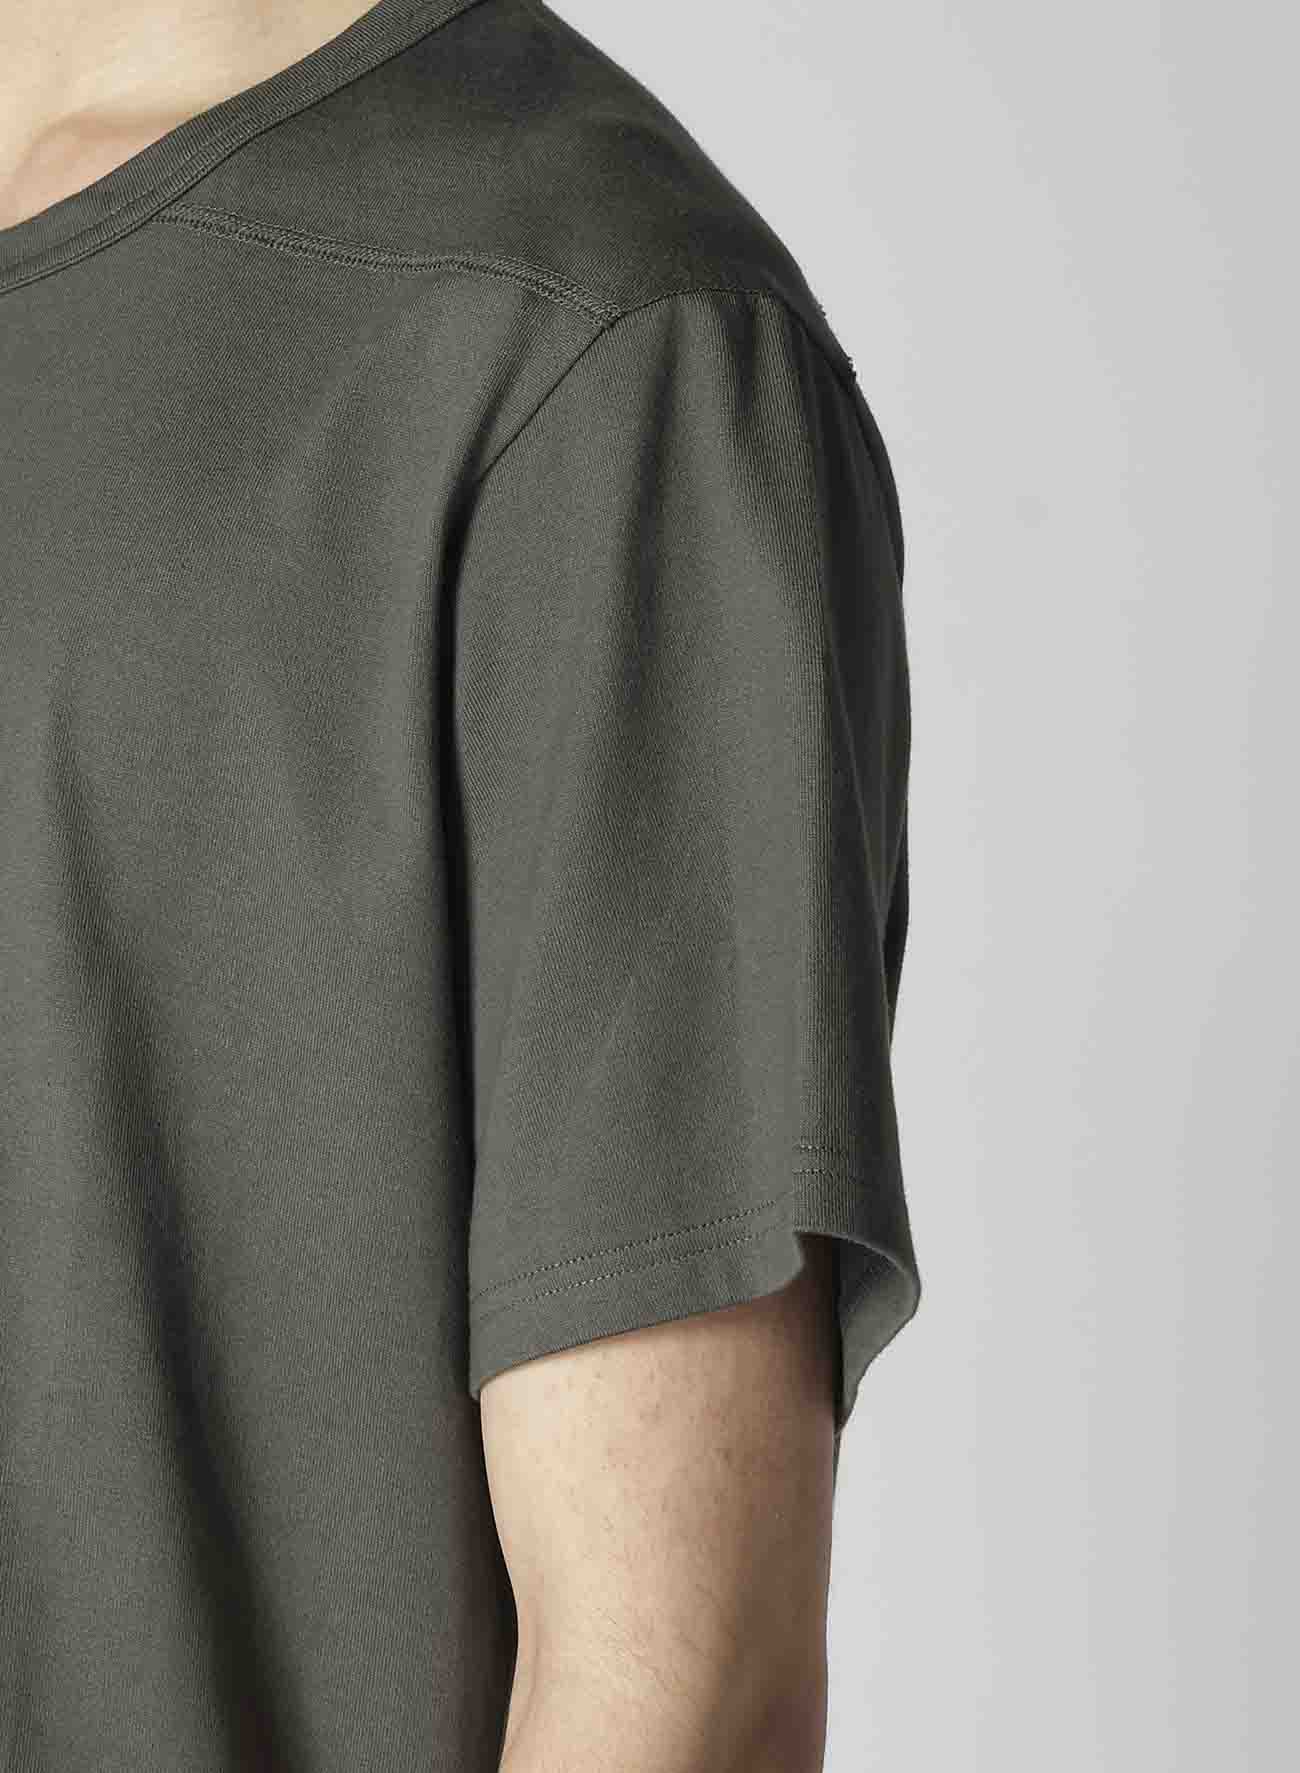 30/2 TIGHT TENSION SINGLE JERSEY RE SHOULDER PANEL SHORT SLEEVE T